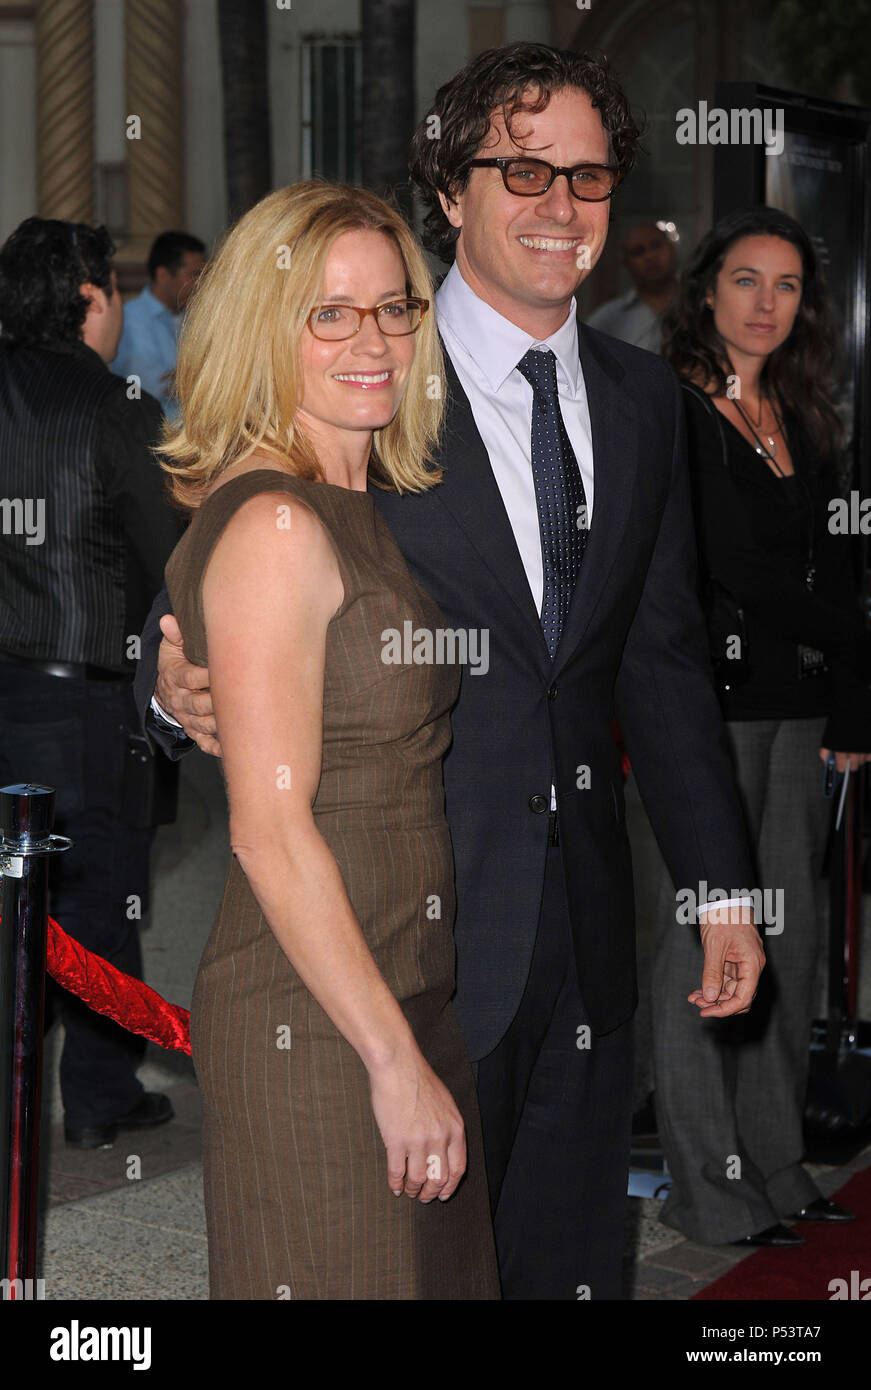 Davis Guggenheim, wife Elisabeth Shue Waiting For Superman  Premiere at the Paramount Theatre In Los Angeles.a Davis Guggenheim, wife Elisabeth Shue 11  Event in Hollywood Life - California, Red Carpet Event, USA, Film Industry, Celebrities, Photography, Bestof, Arts Culture and Entertainment, Celebrities fashion, Best of, Hollywood Life, Event in Hollywood Life - California, Red Carpet and backstage, Music celebrities, Topix, Couple, family ( husband and wife ) and kids- Children, brothers and sisters inquiry tsuni@Gamma-USA.com, Credit Tsuni / USA, 2010 Stock Photo